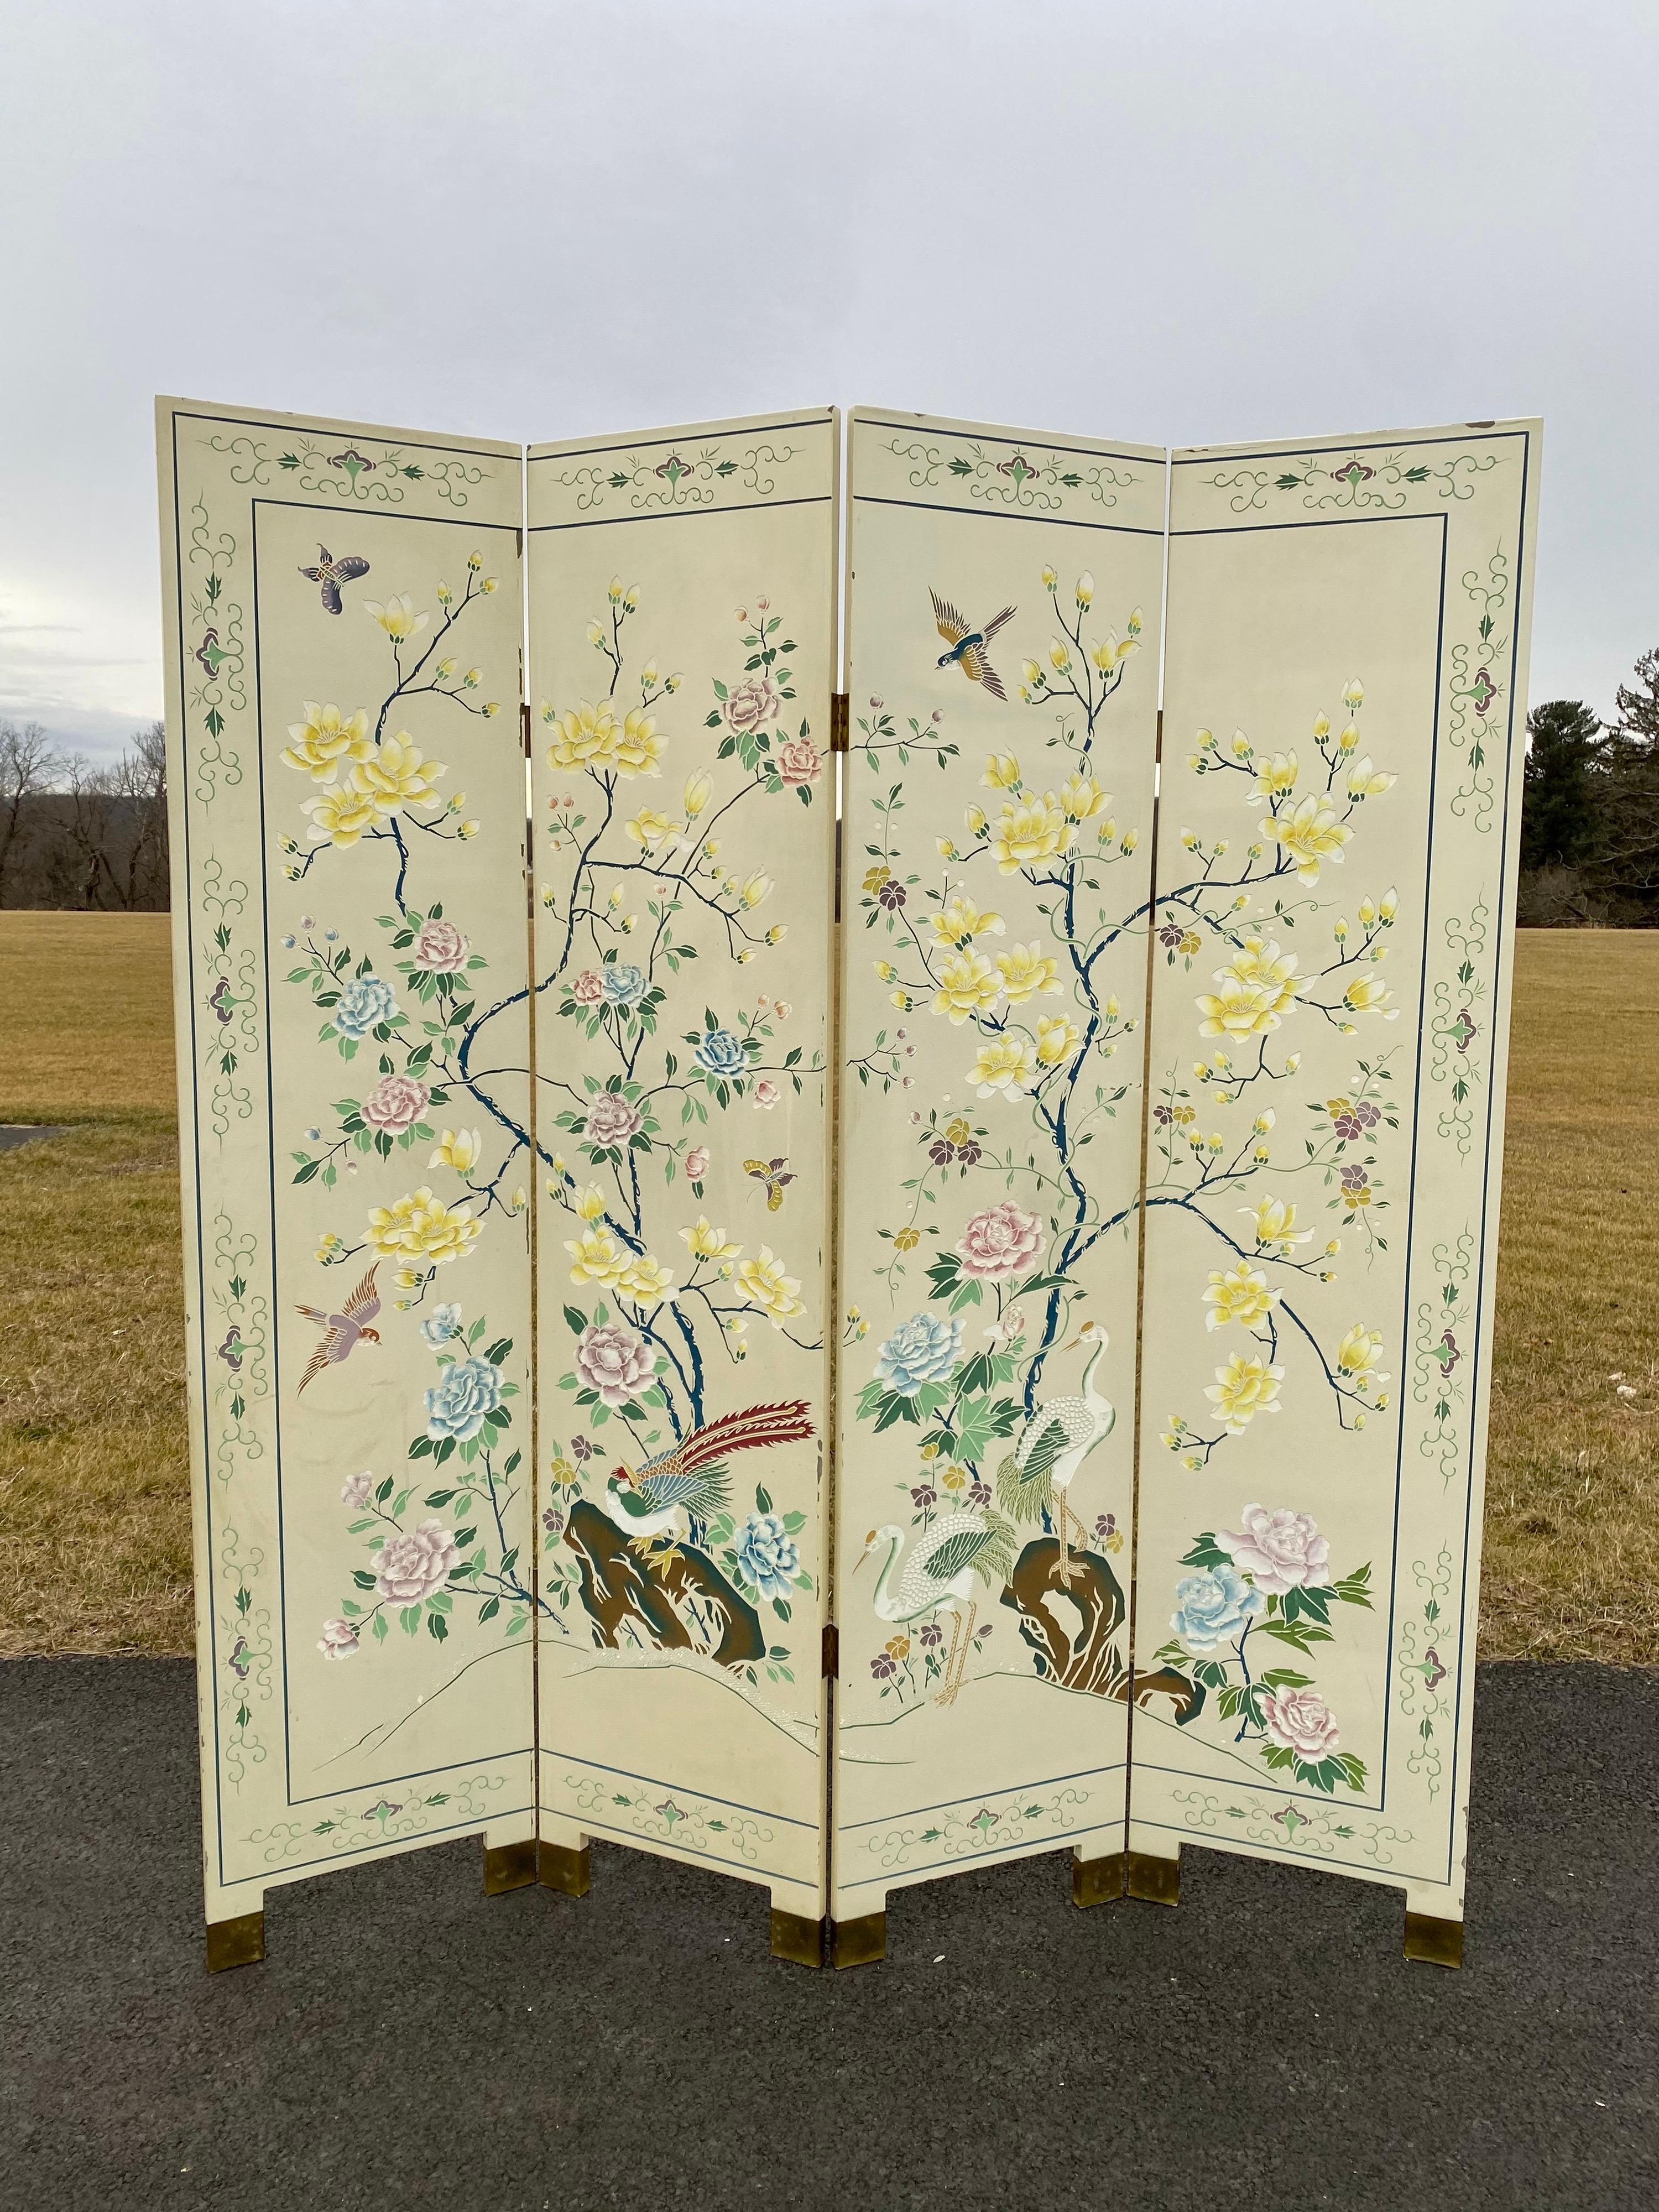 Beautiful chinoiserie tree of life spring or summer floral and bird scene floor screen divider featuring double sided scenes. Four panels are joined by brass toned hardware and legs are capped in brass as well.

Each panel features highly detailed